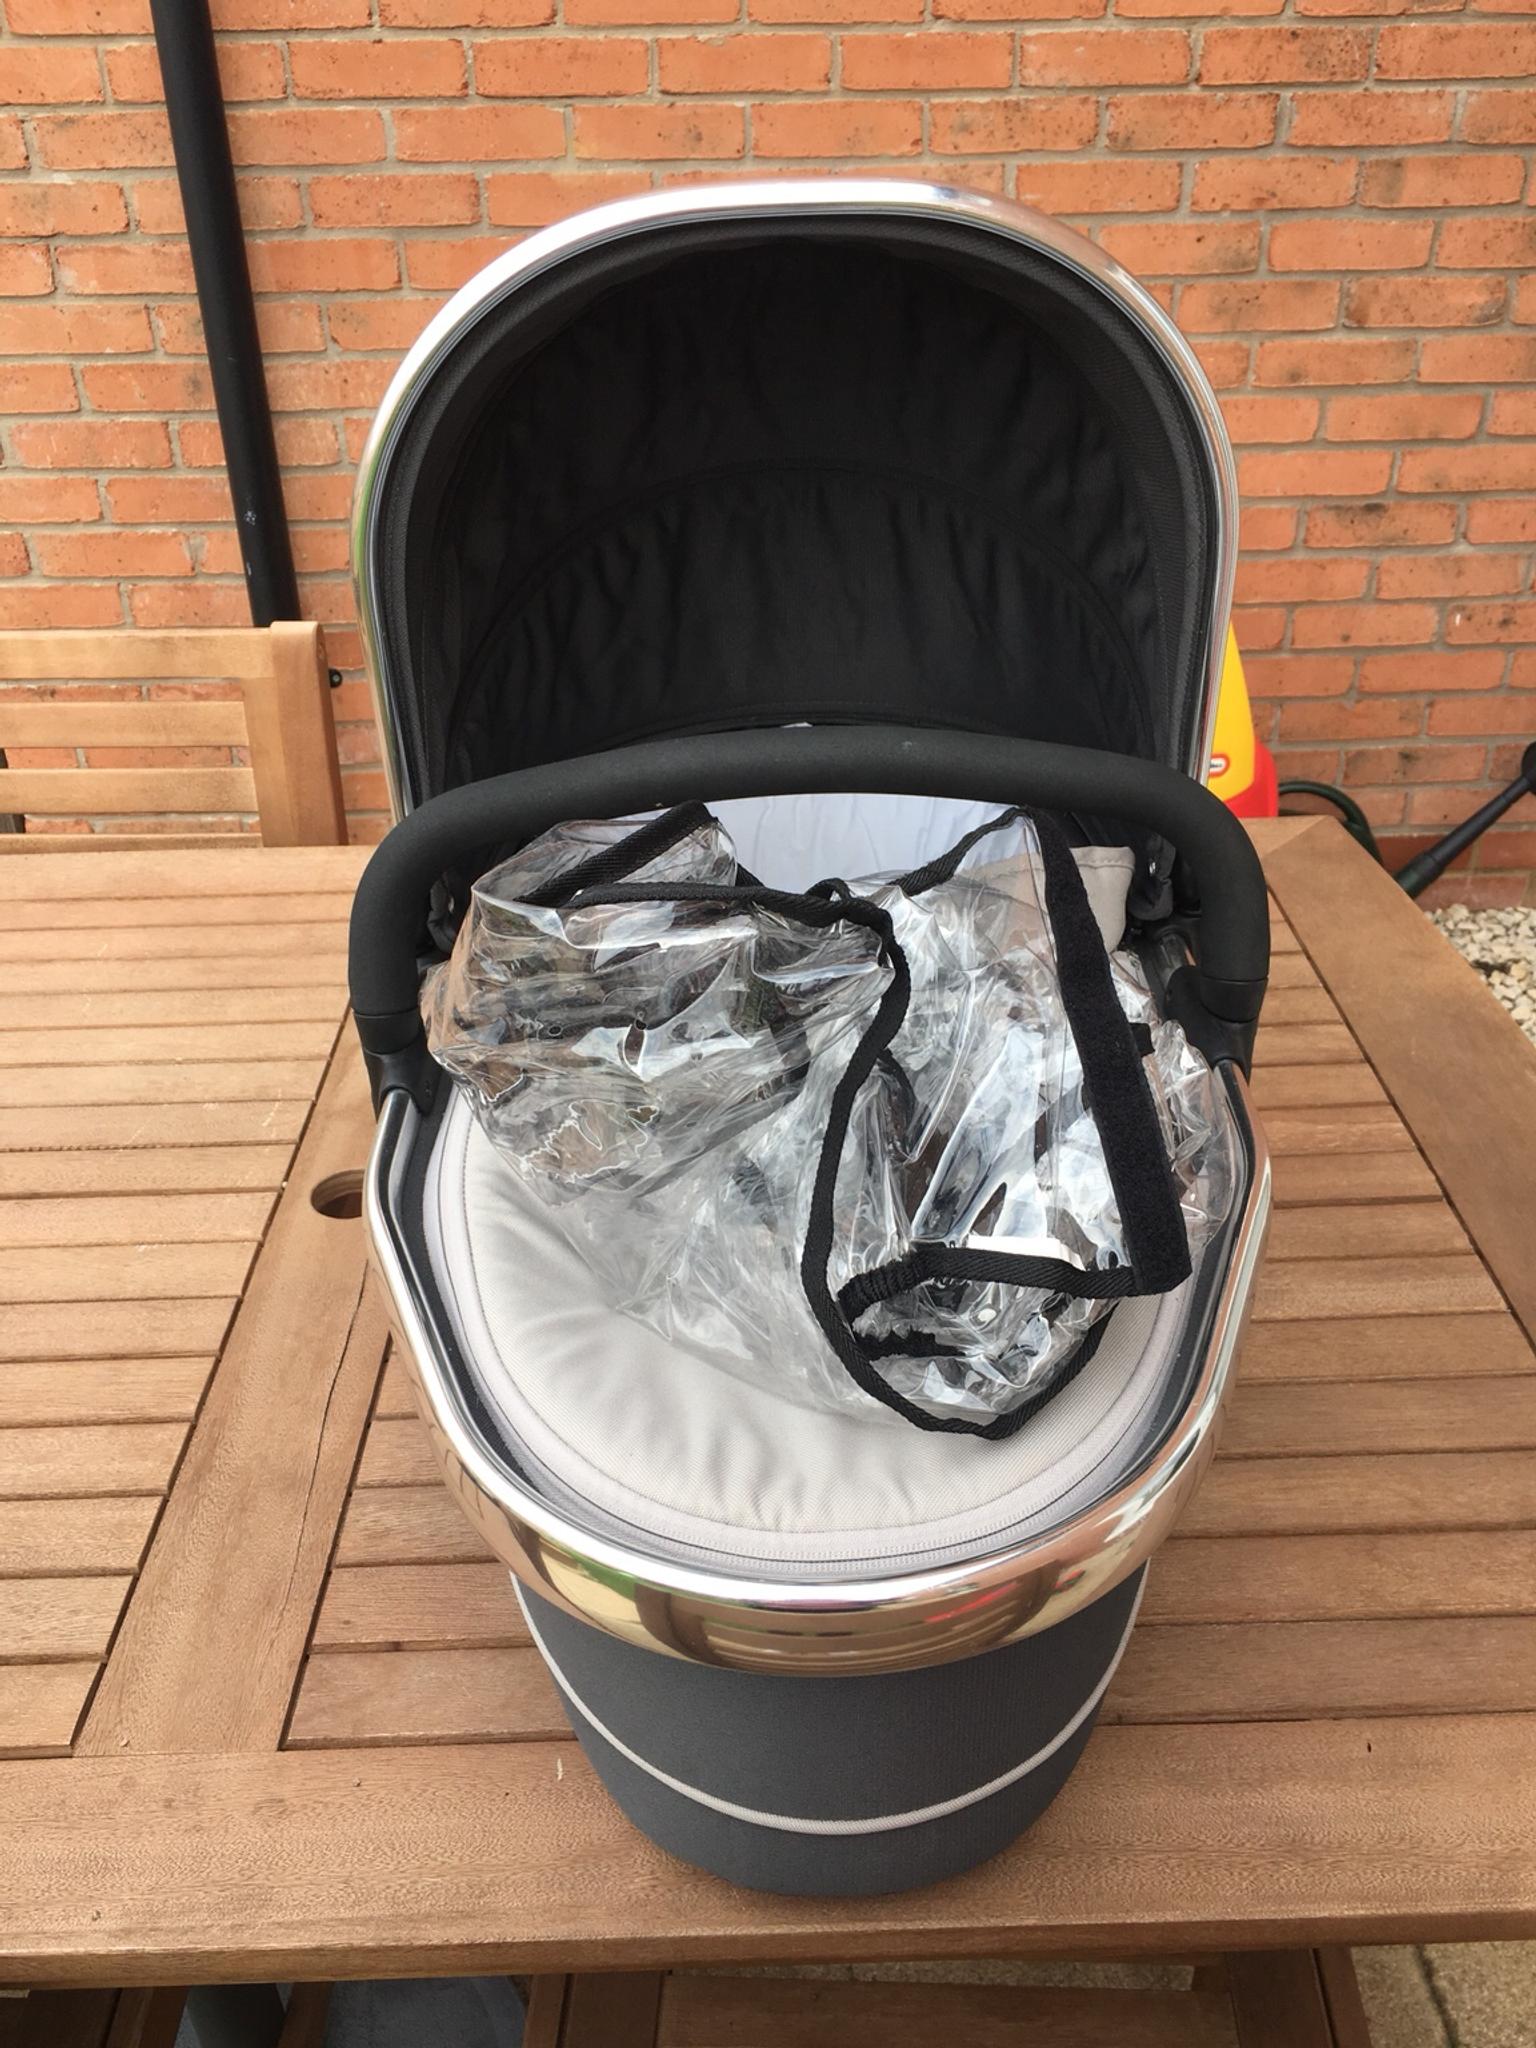 icandy peach 3 lower carrycot